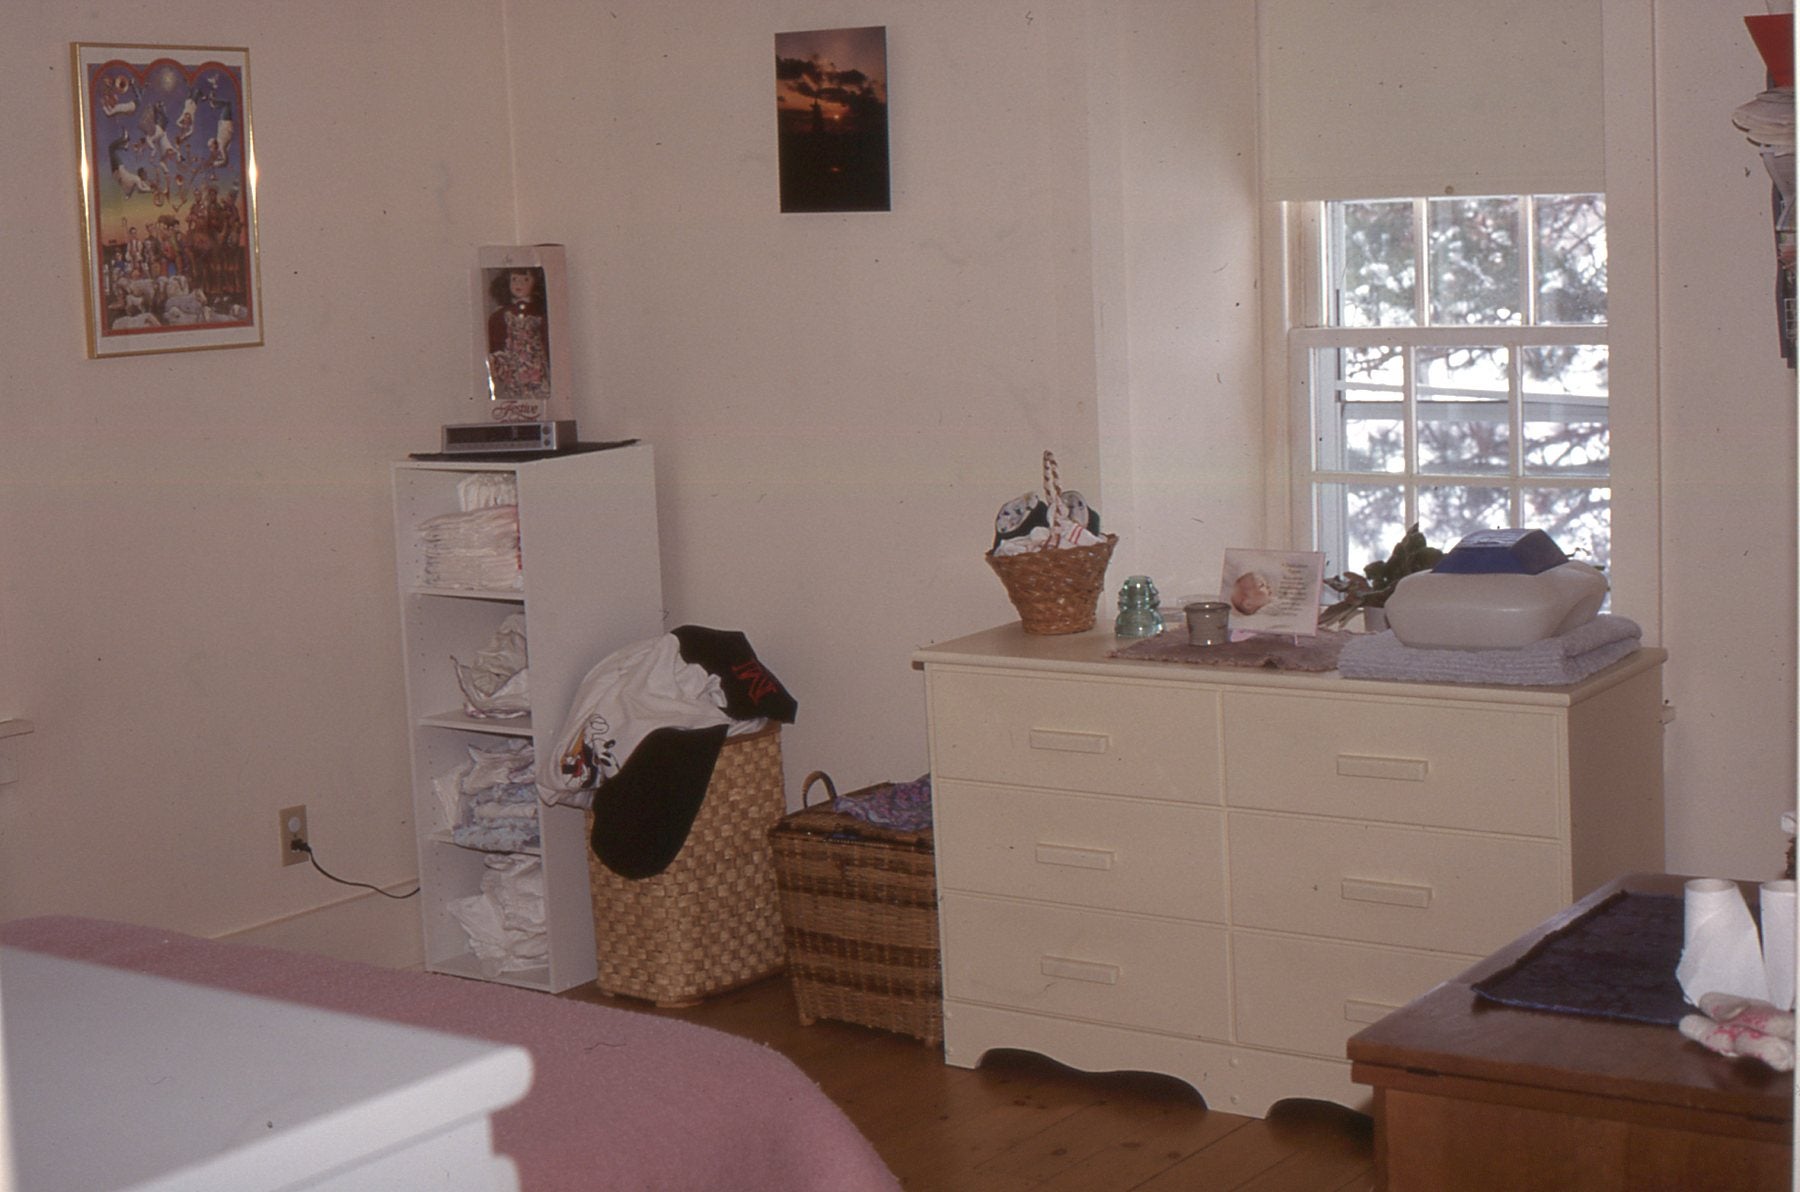 The side wall of a white bedroom with a window, and white dresser